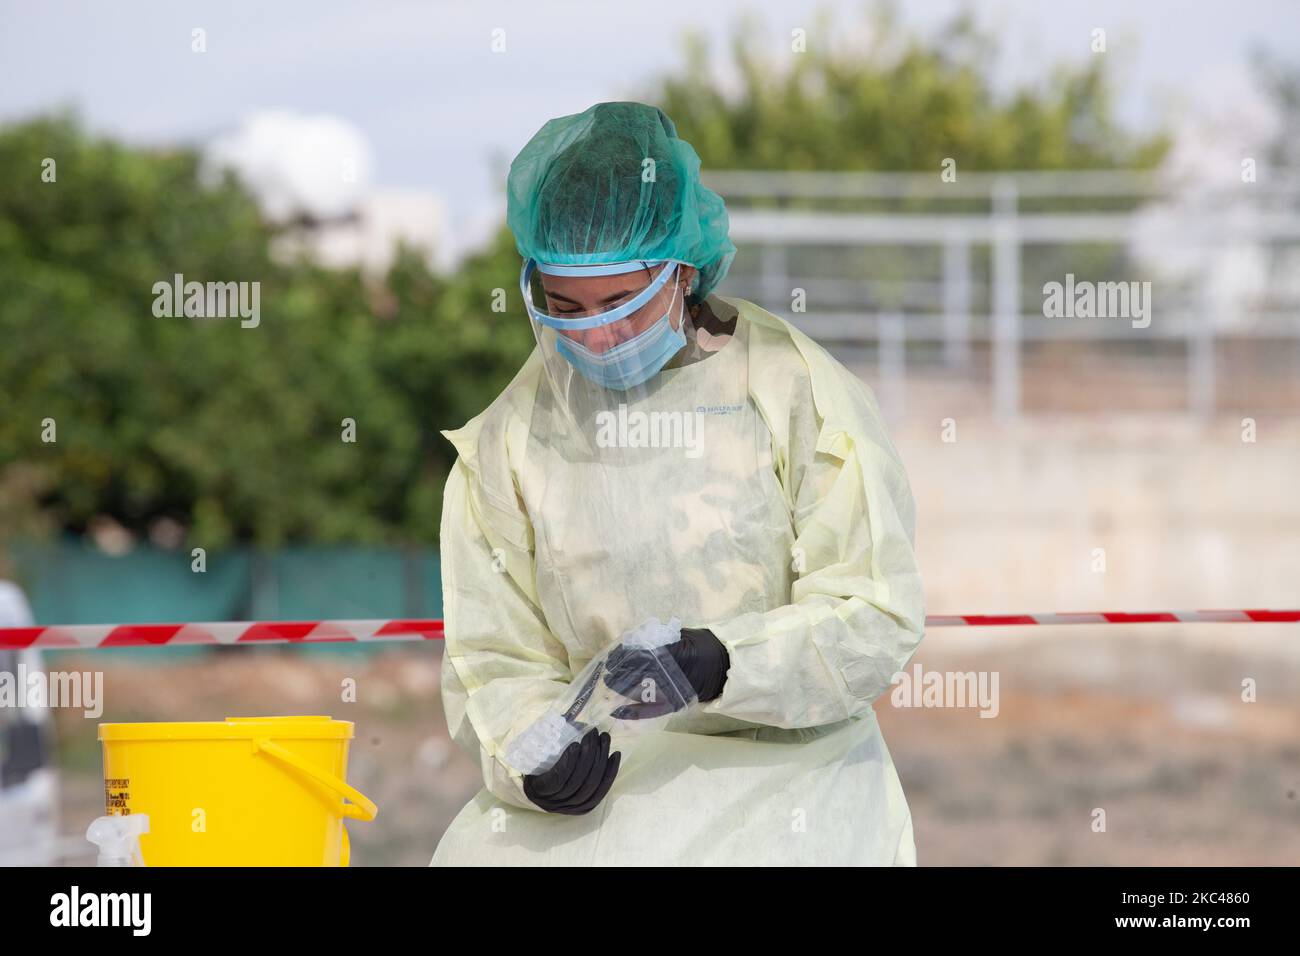 A medical worker, during the Rapid test for COVID-19, in Yeri, municipality of Nicosia, Cyprus on Nov. 19, 2020. (Photo by George Christophorou/NurPhoto) Stock Photo